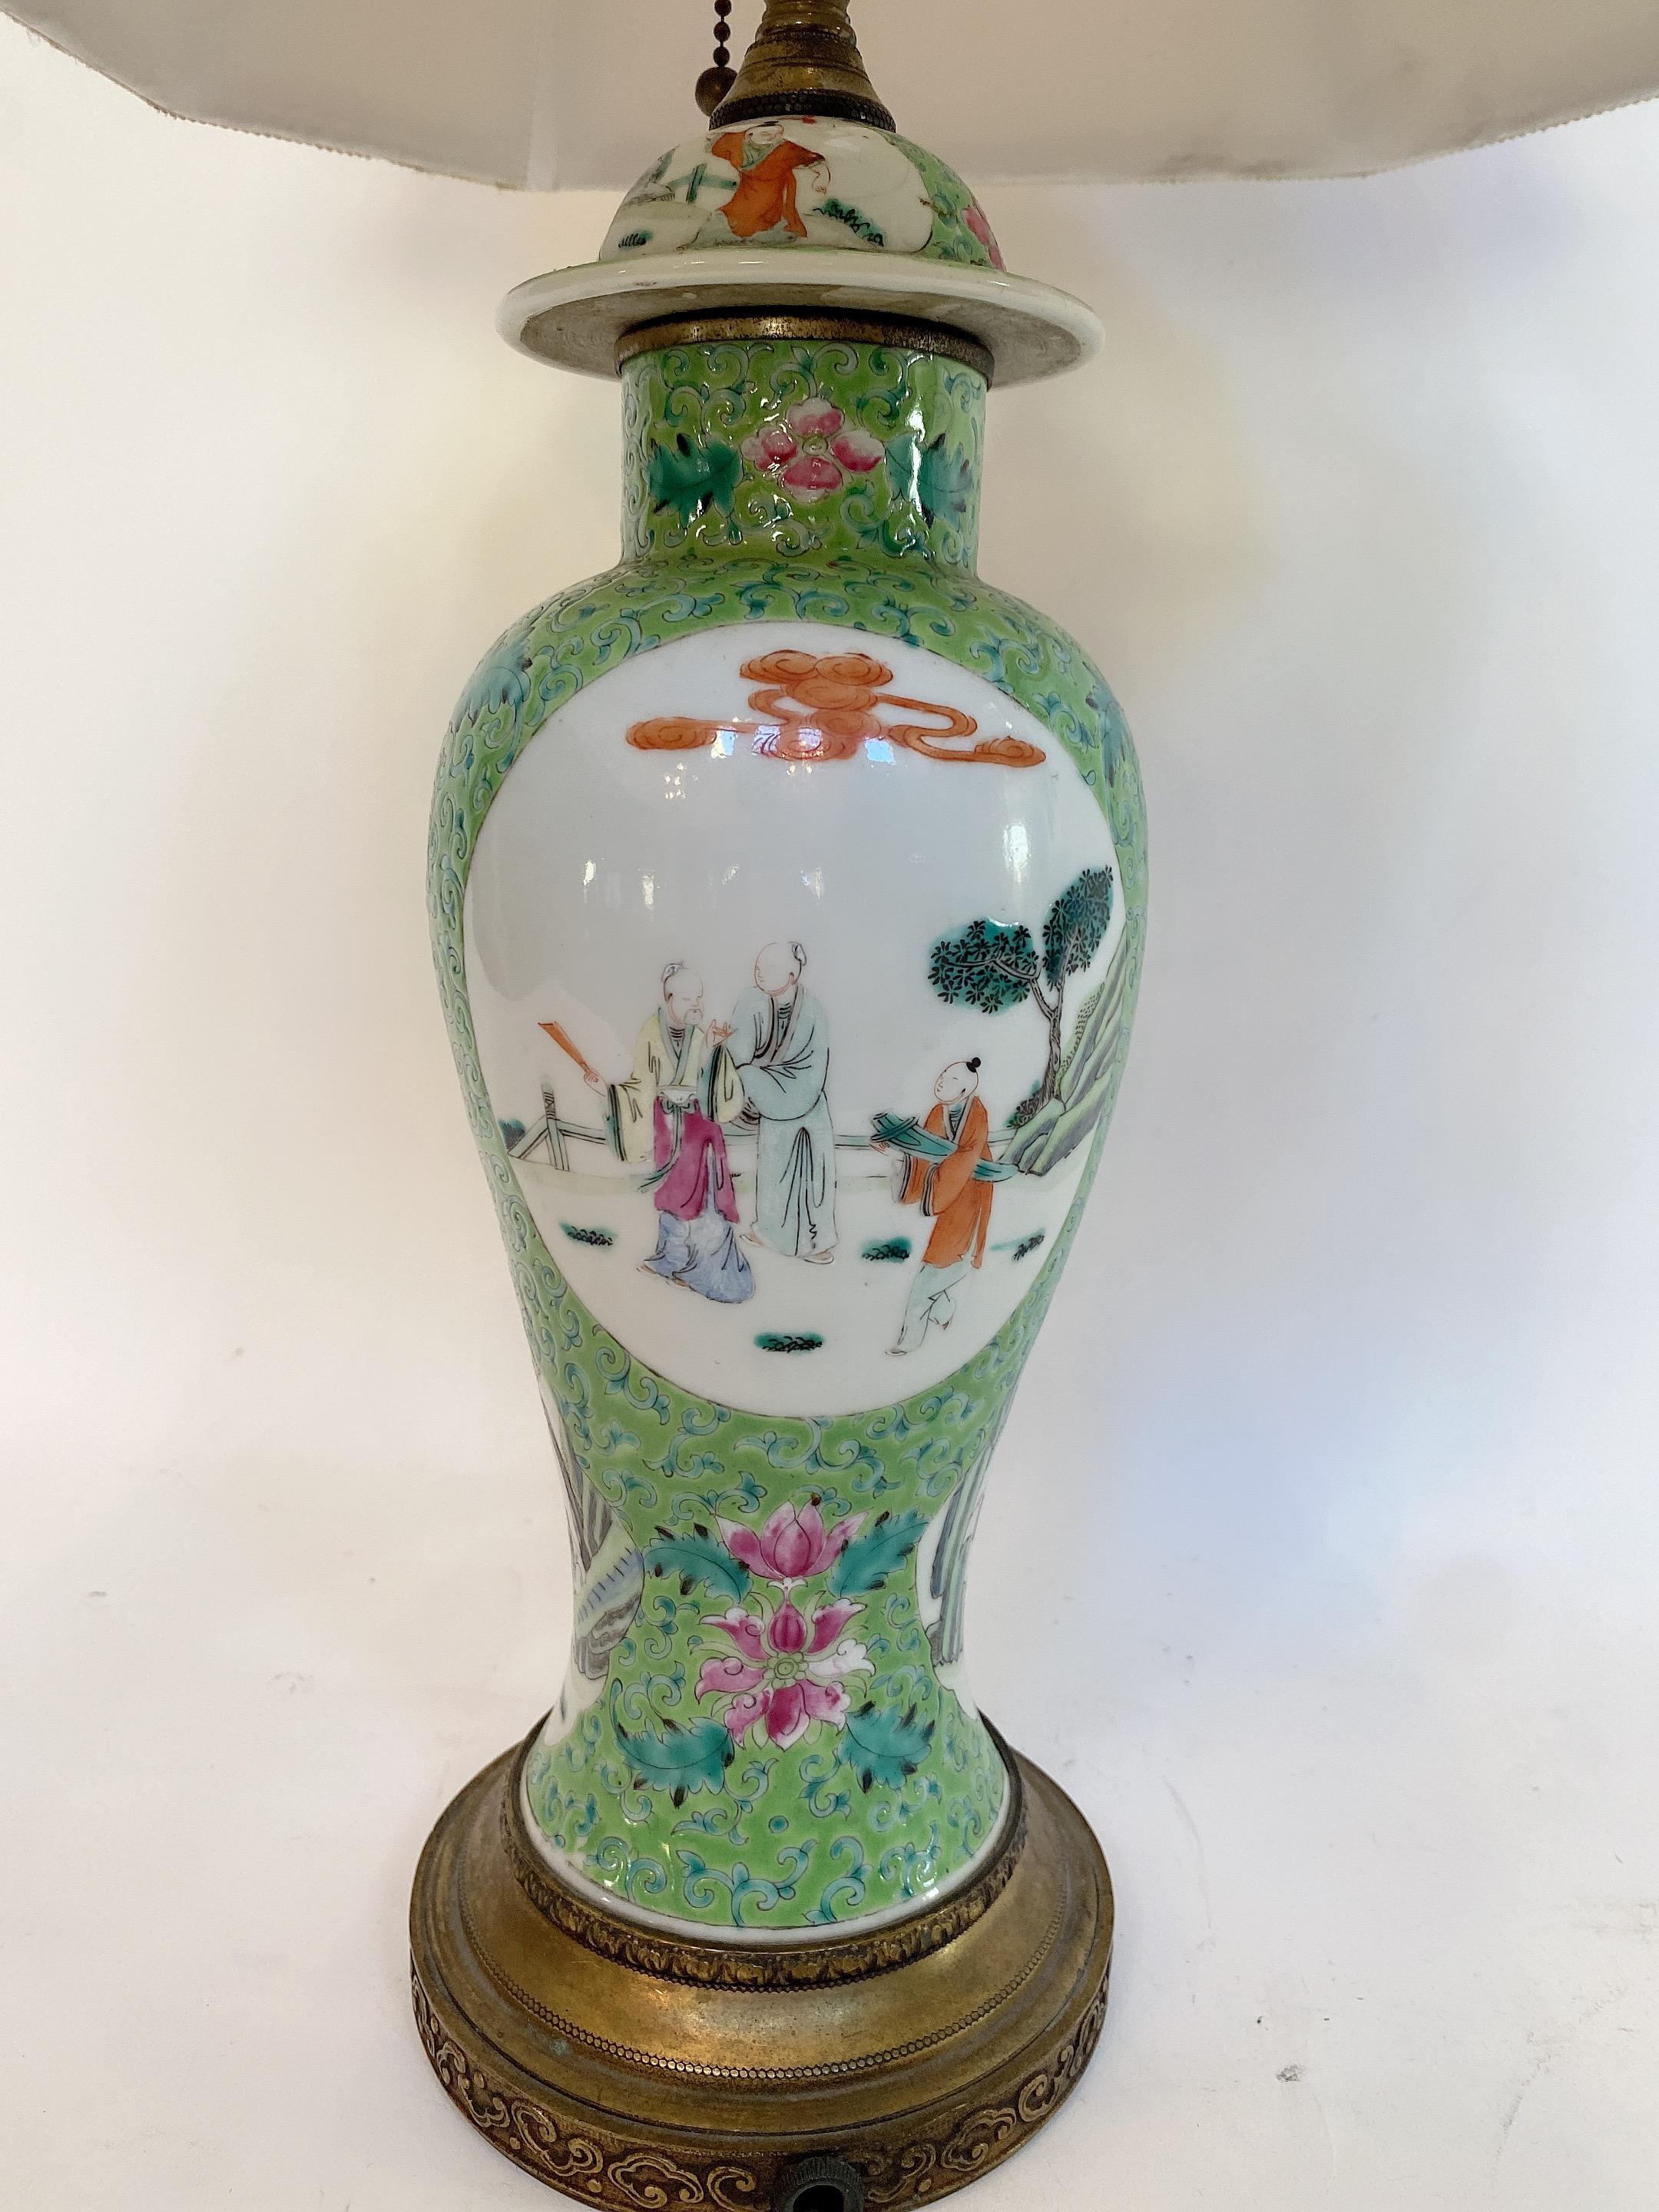 Qing Dynasty an antique 19th century Chinese green Famille rose porcelain vase as lamp, the Measures: Vase: 12 '' diameter x 12'' high. total base to top 25''.